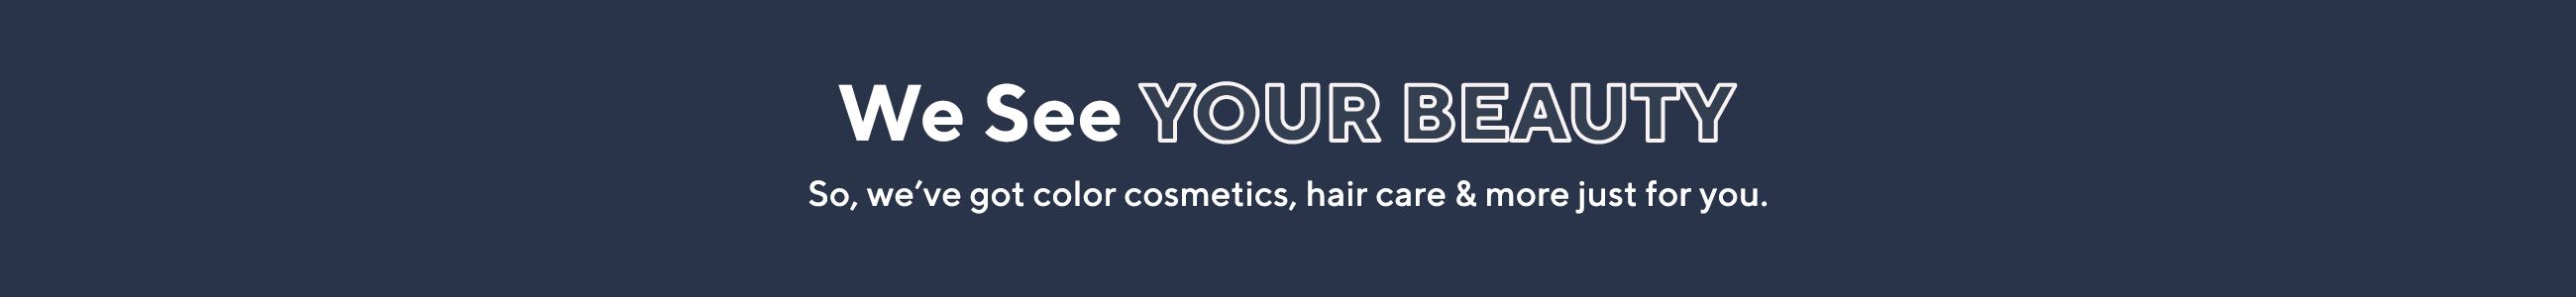 We See Your Beauty - So, we’ve got color cosmetics, hair care & more just for you.